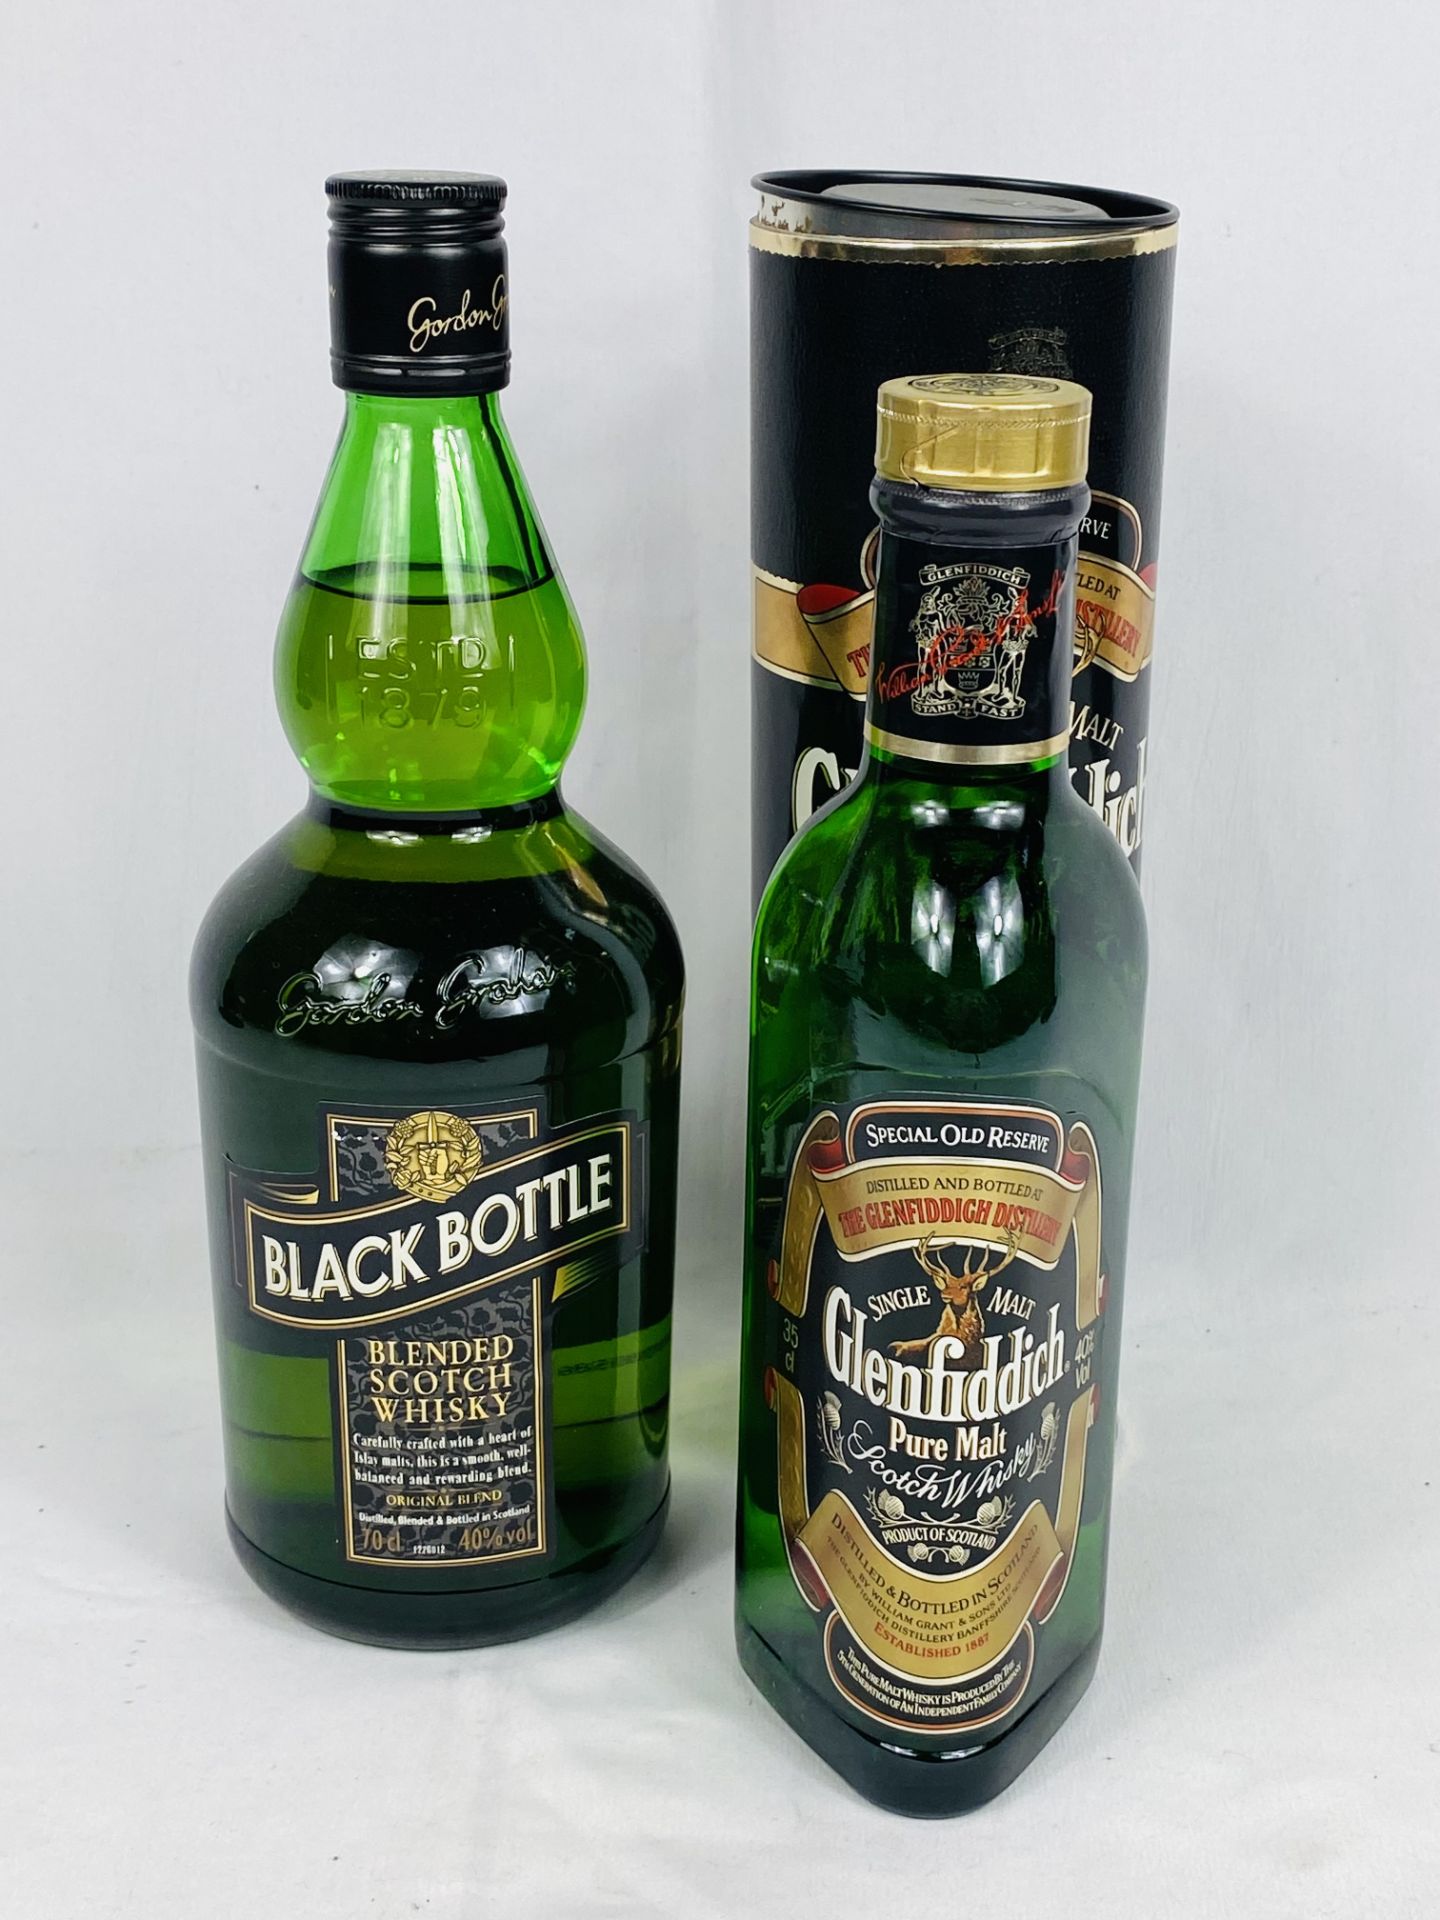 35cl bottle of Glenfiddich Scotch whisky together with one other